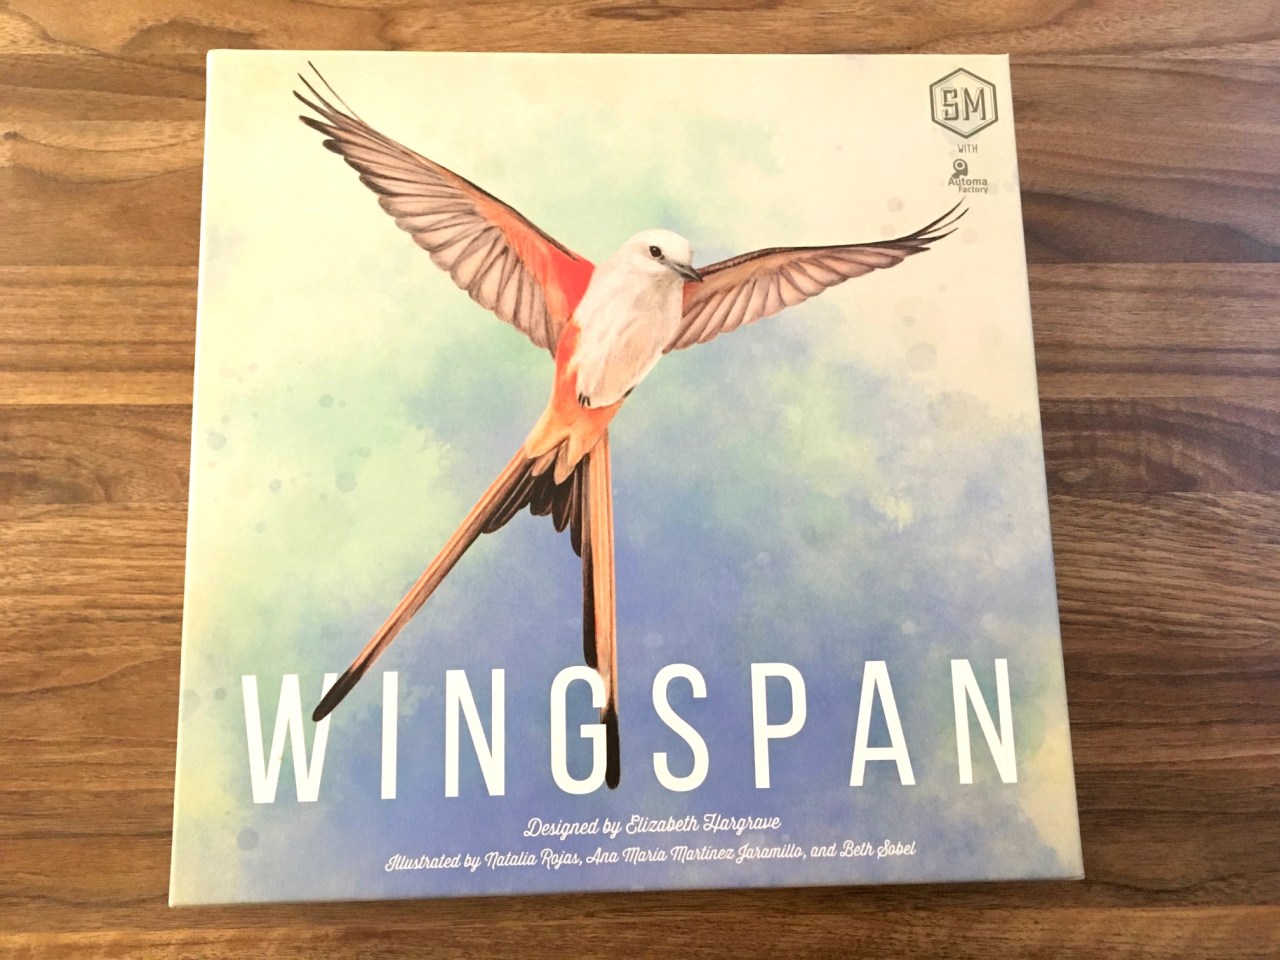 board game box with a flying bird on it